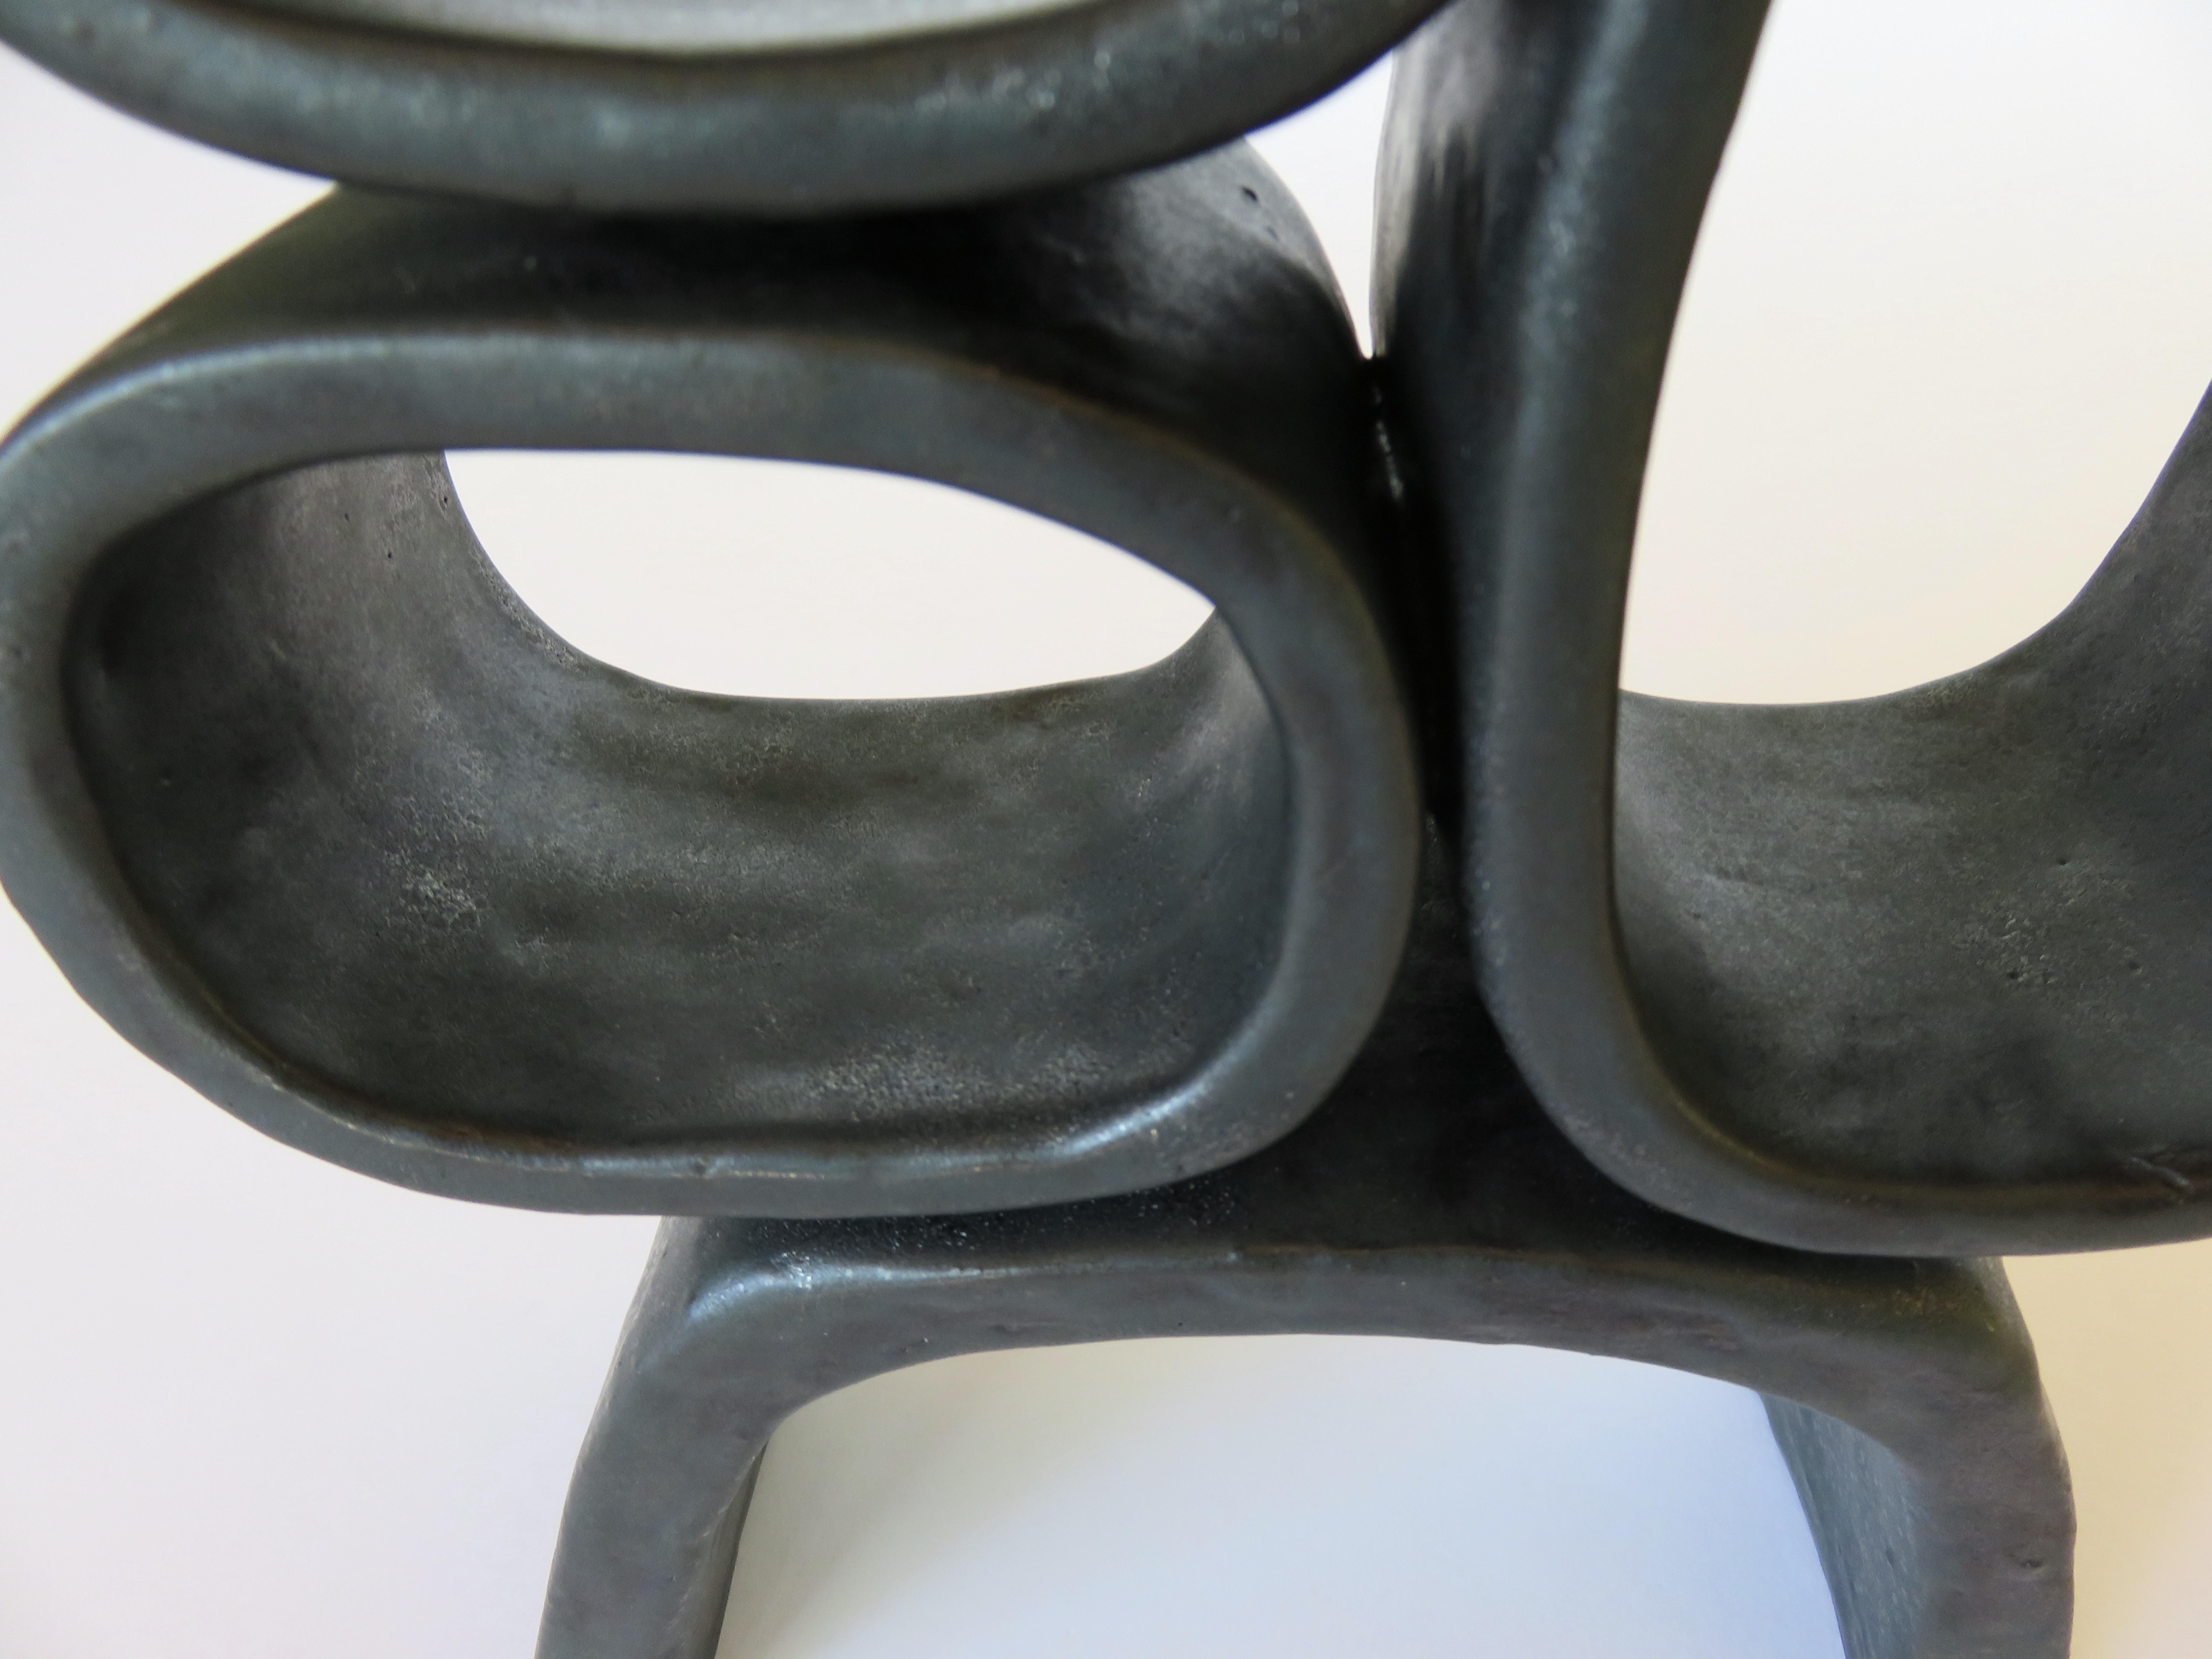 Metallic Black Hand-Built Ceramic Sculpture with Hollow Rings on Angled Legs 1